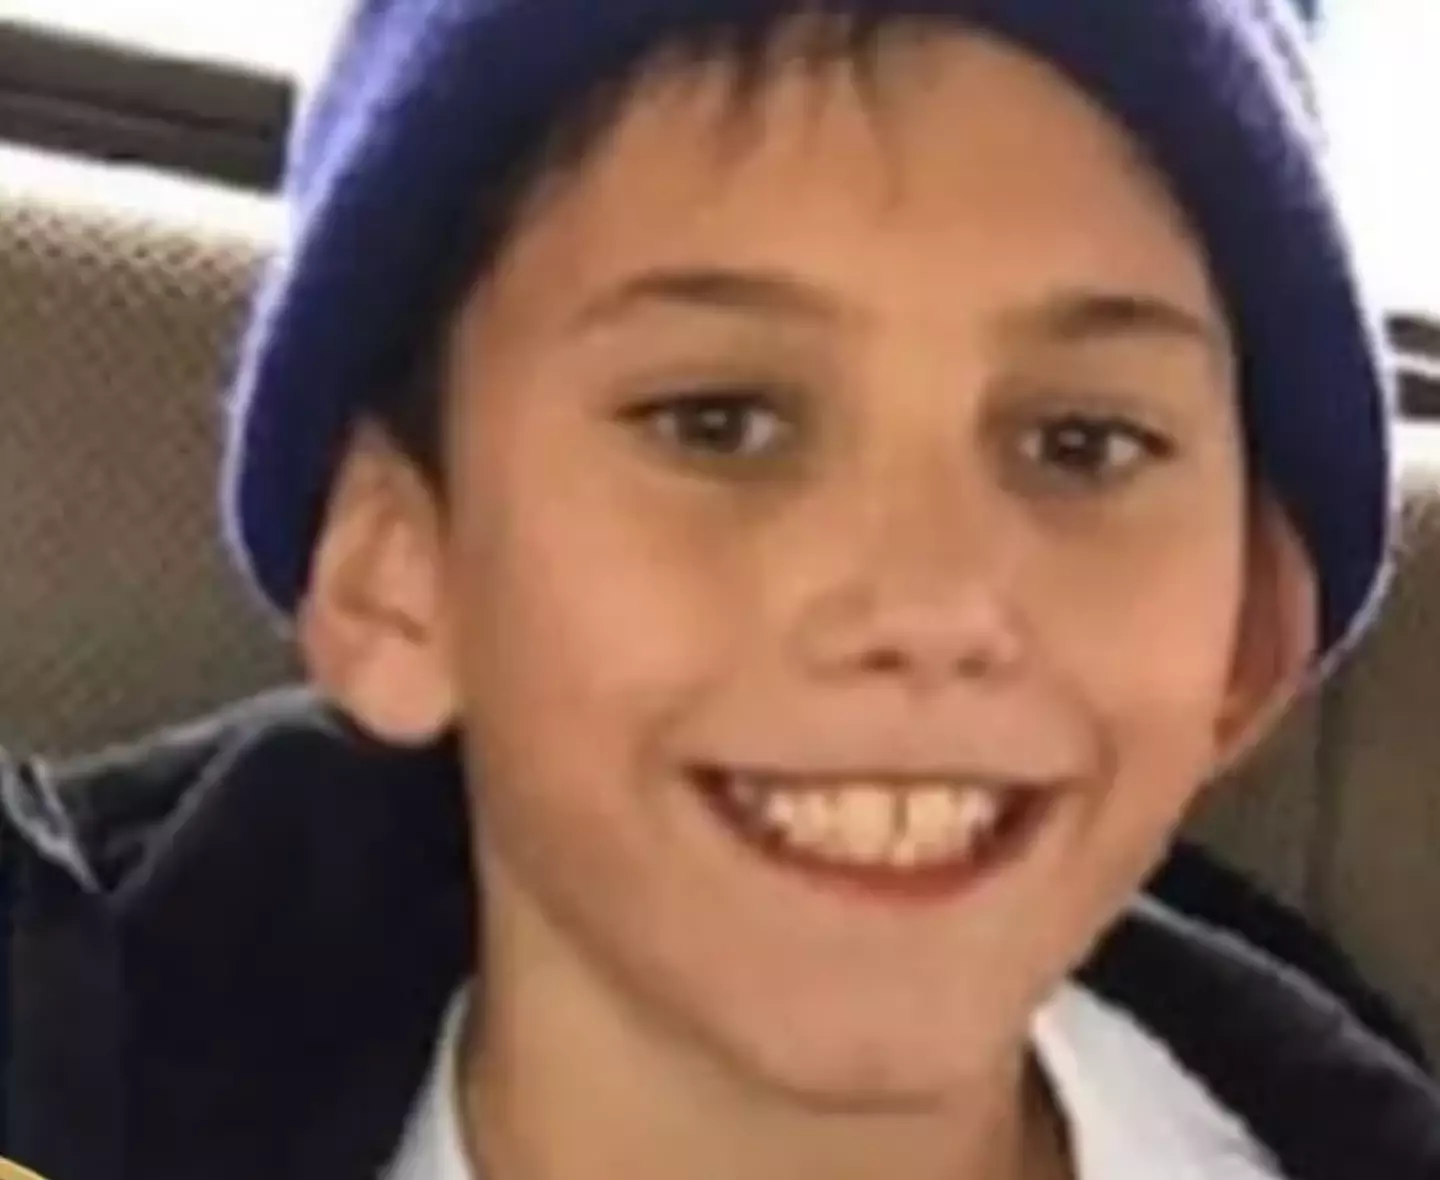 Gannon Staunch was just 11-years-old when he died.